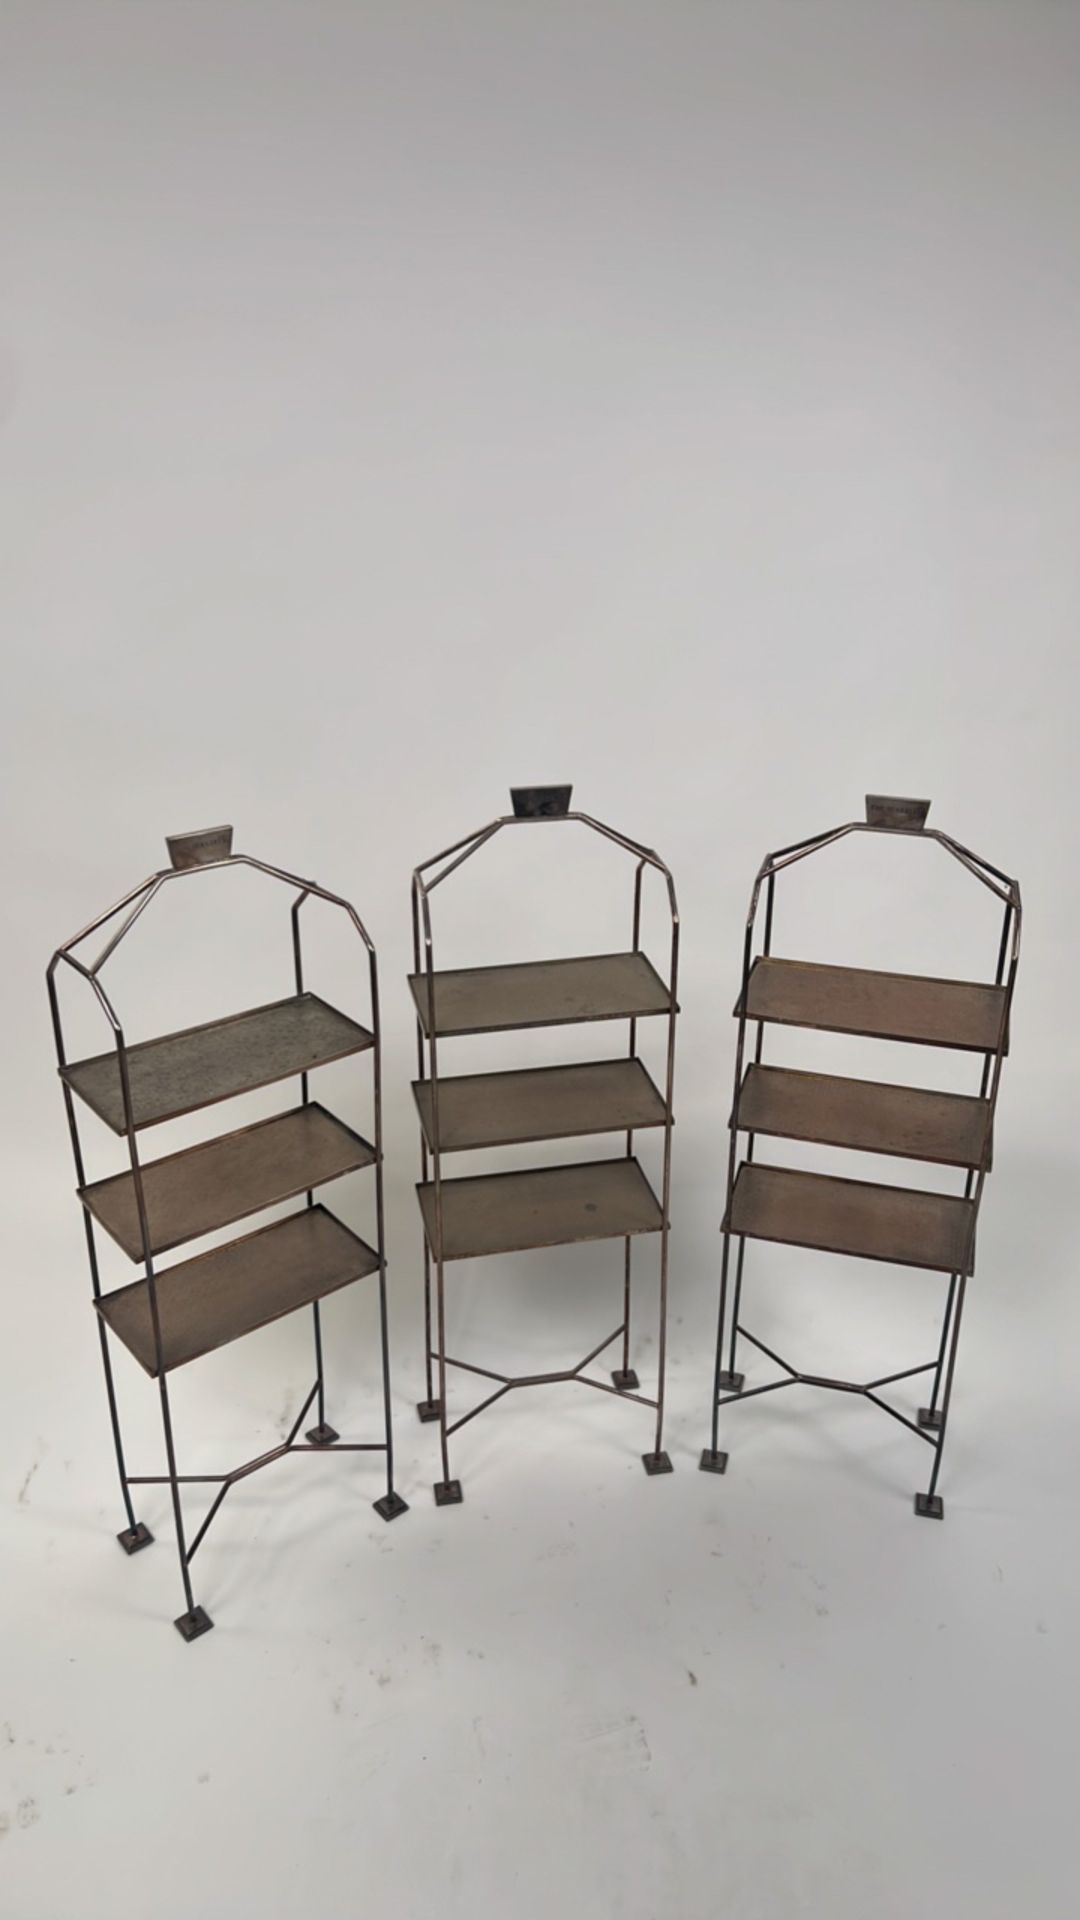 A trio of metal sandwich and cake stands - Image 3 of 8